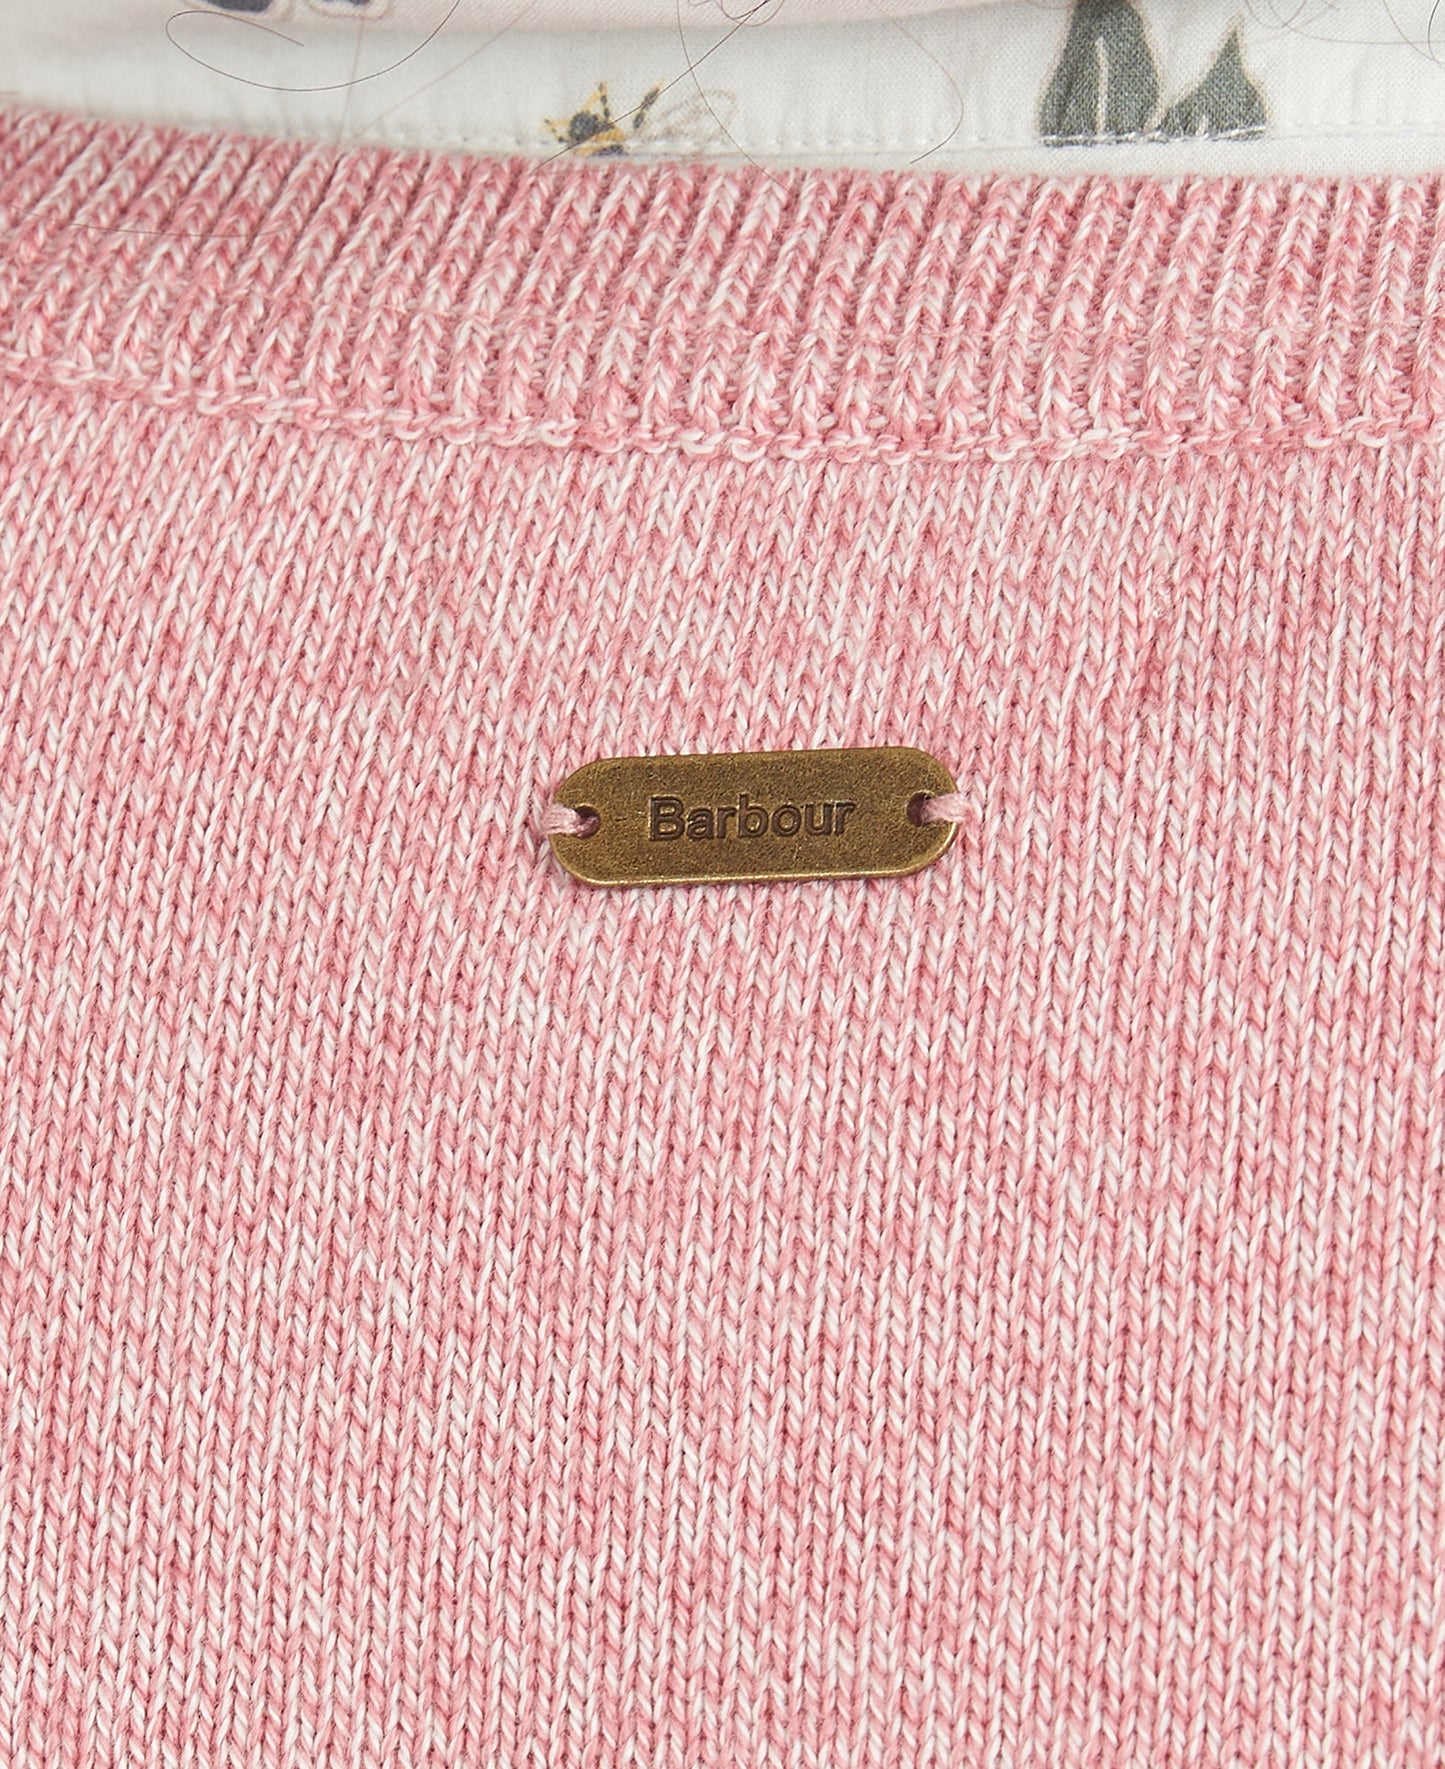 Barbour Bowland Knit Sweater